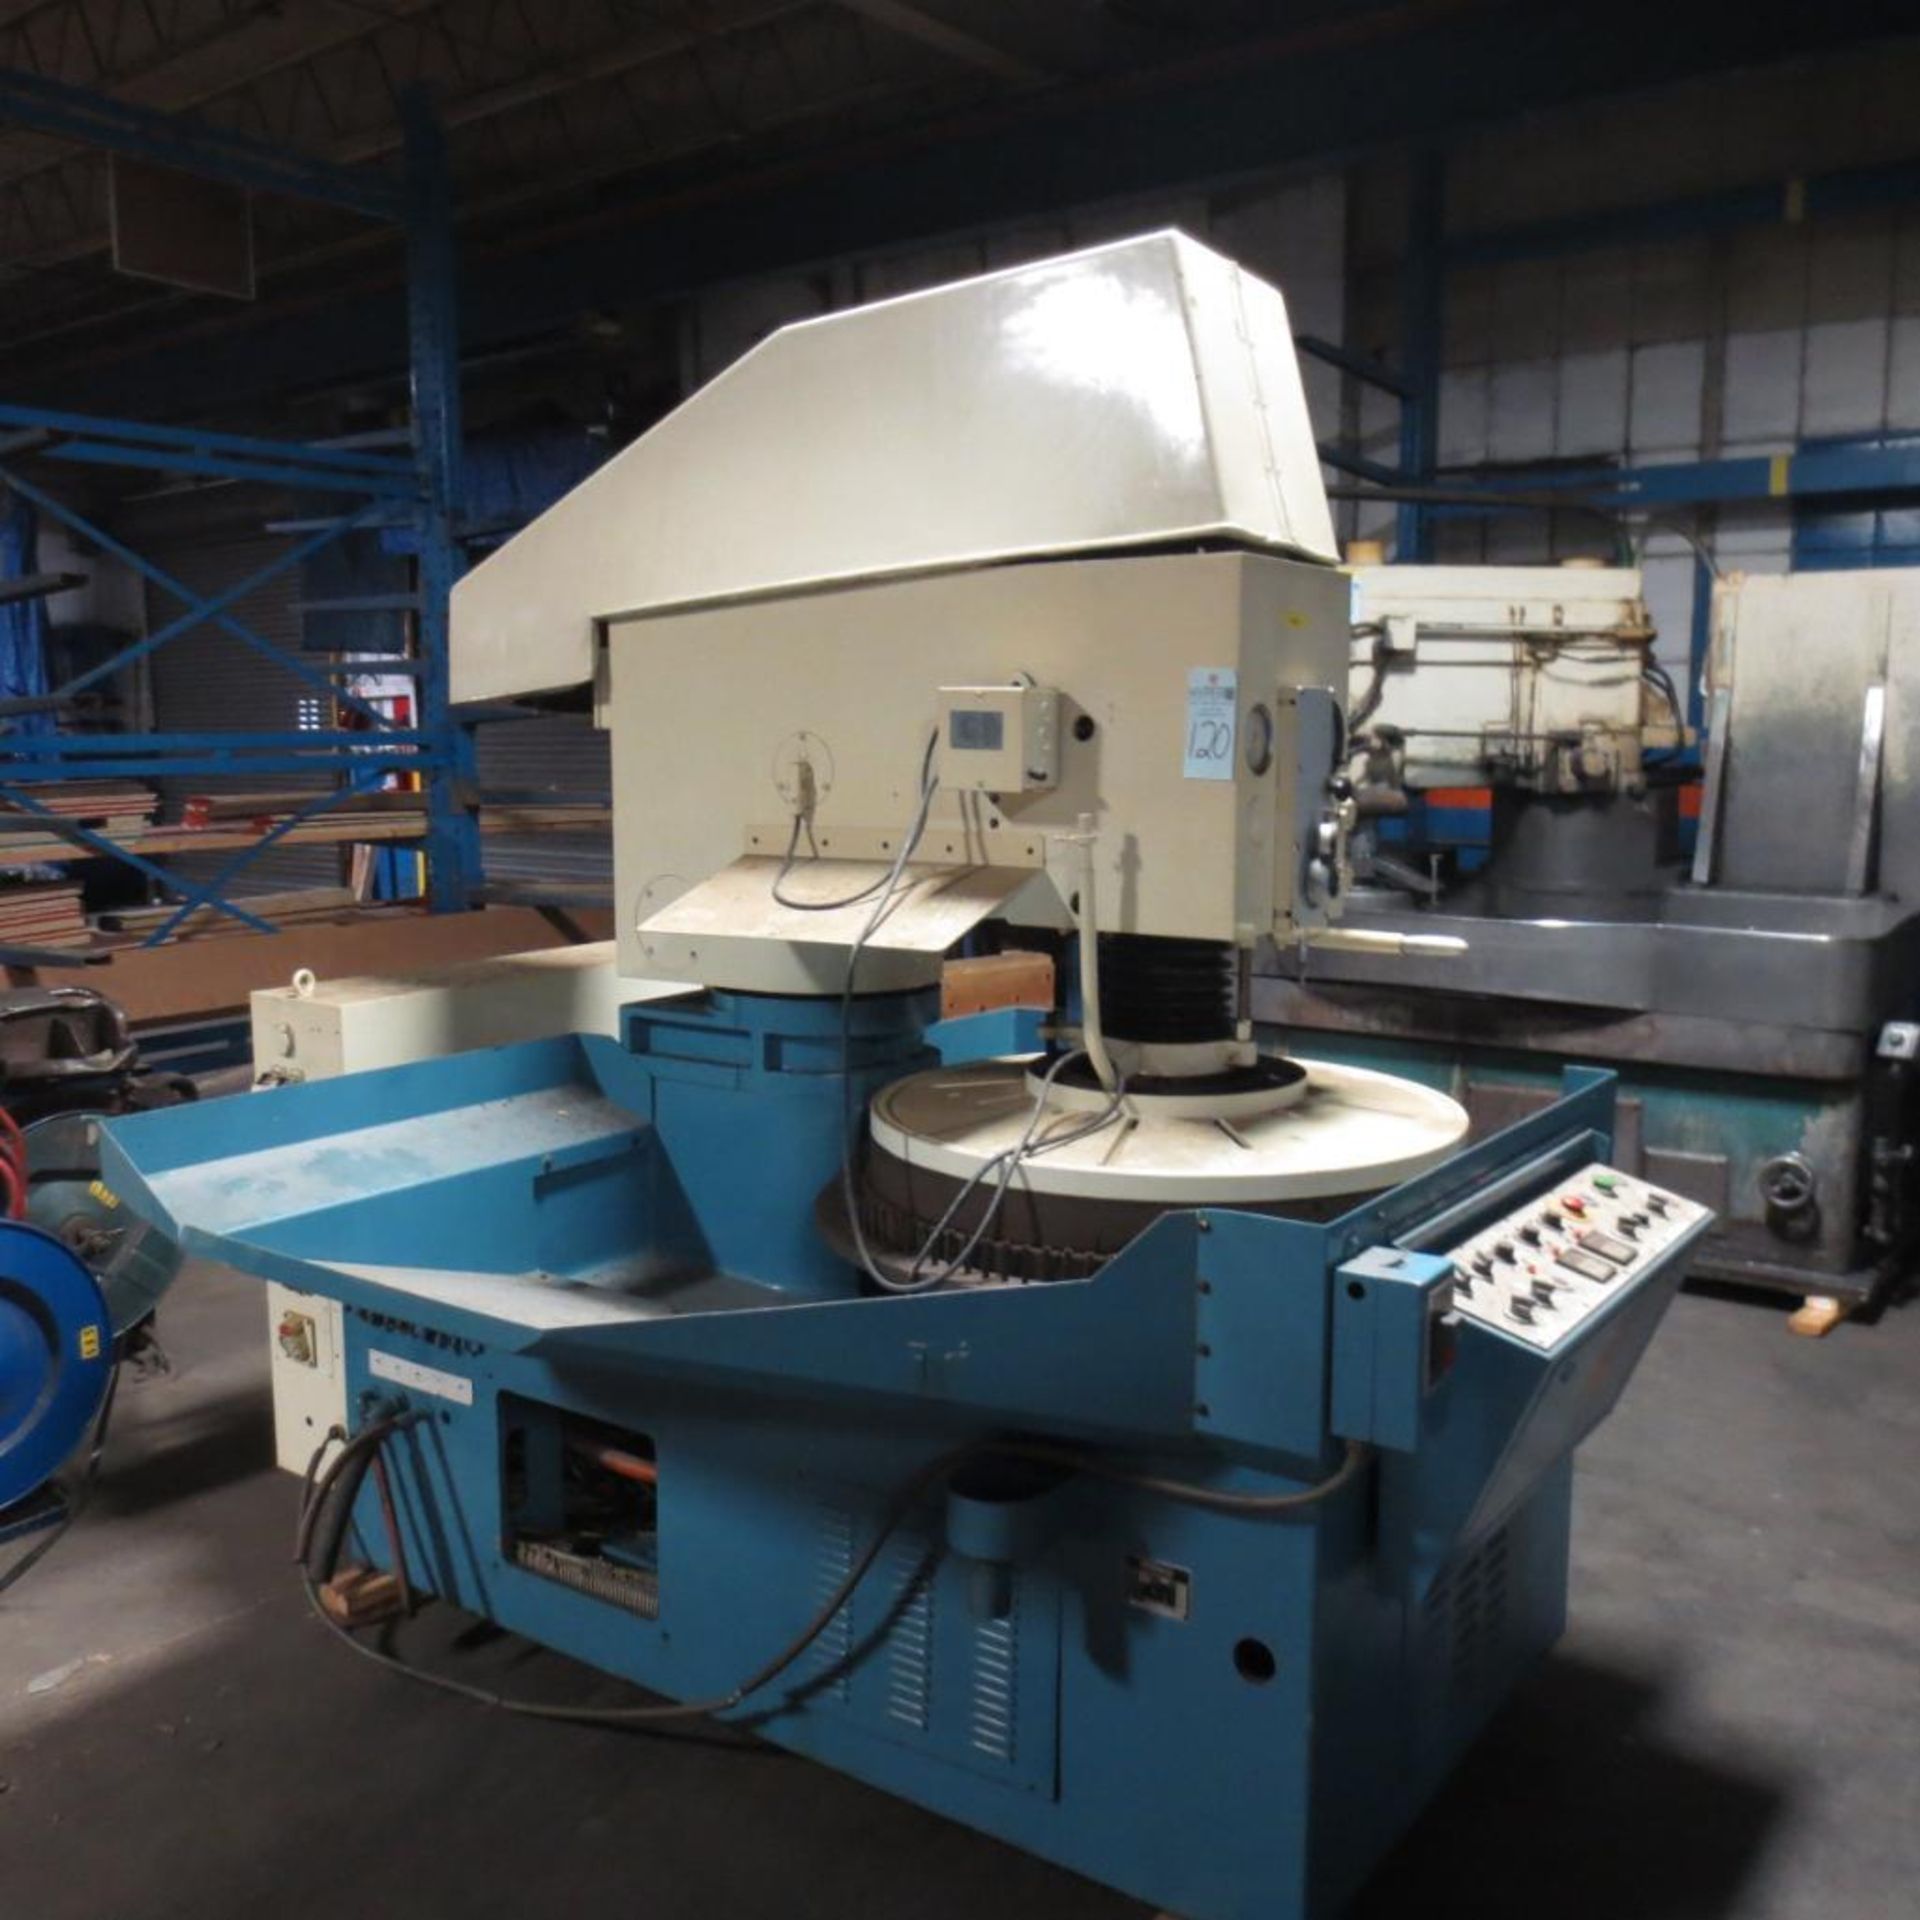 Peter Wolters 30" Type AL2 Rotary Lapping Machine S/N: 366, 3-KW Spindle Drive. Loading Fee is $550.